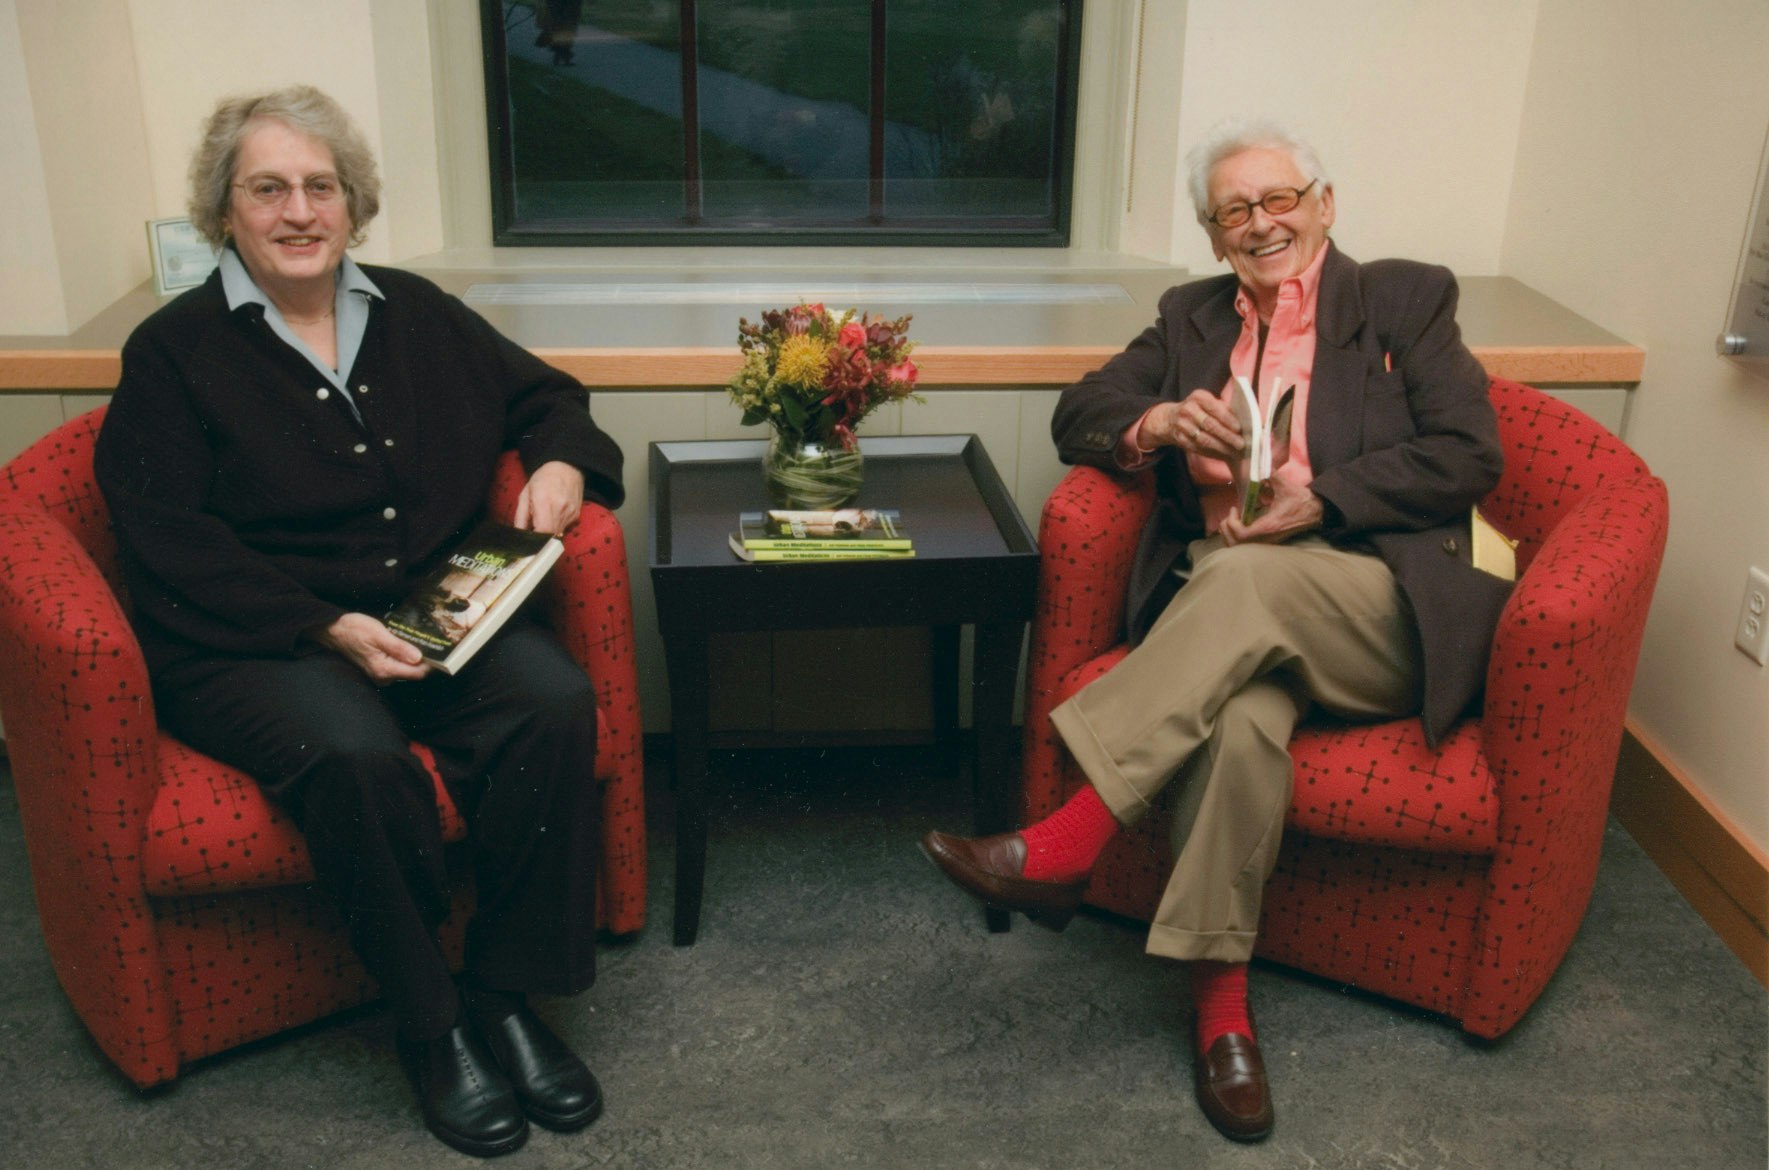 Kip Tiernan and Fran Froehlich sitting in red chairs at Schlesinger Library